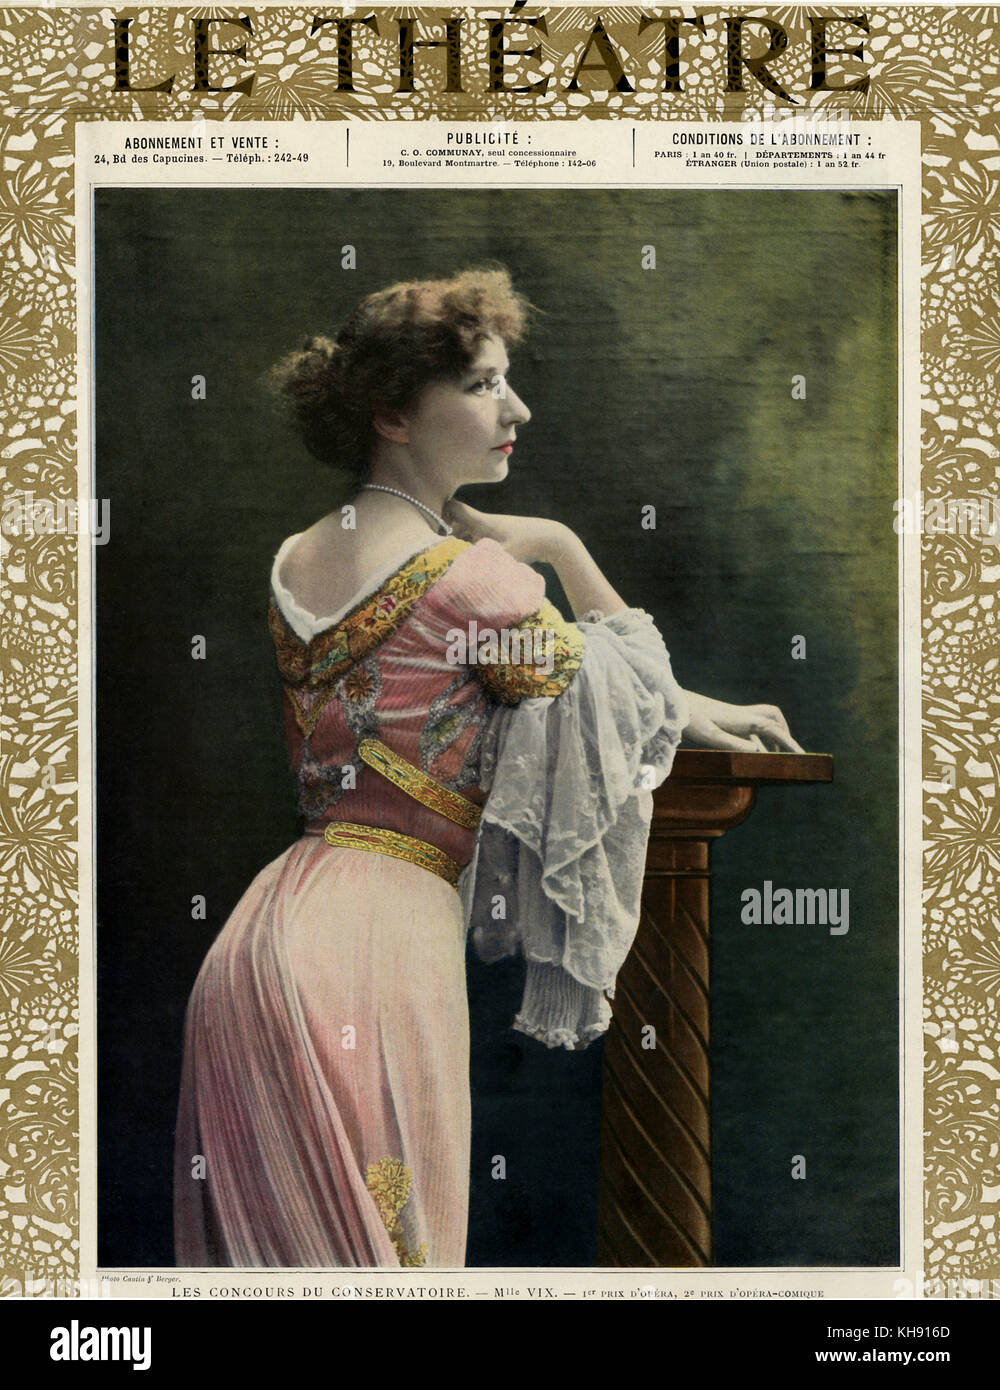 Genevieve Vix  -  published in Le Theatre journal,   11 August 1904 .  French soprano, 31 December 1879 –  25 August 1939. Creator of role of Concepción in L'heure espagnole - opera by  Maurice Ravel. Stock Photo